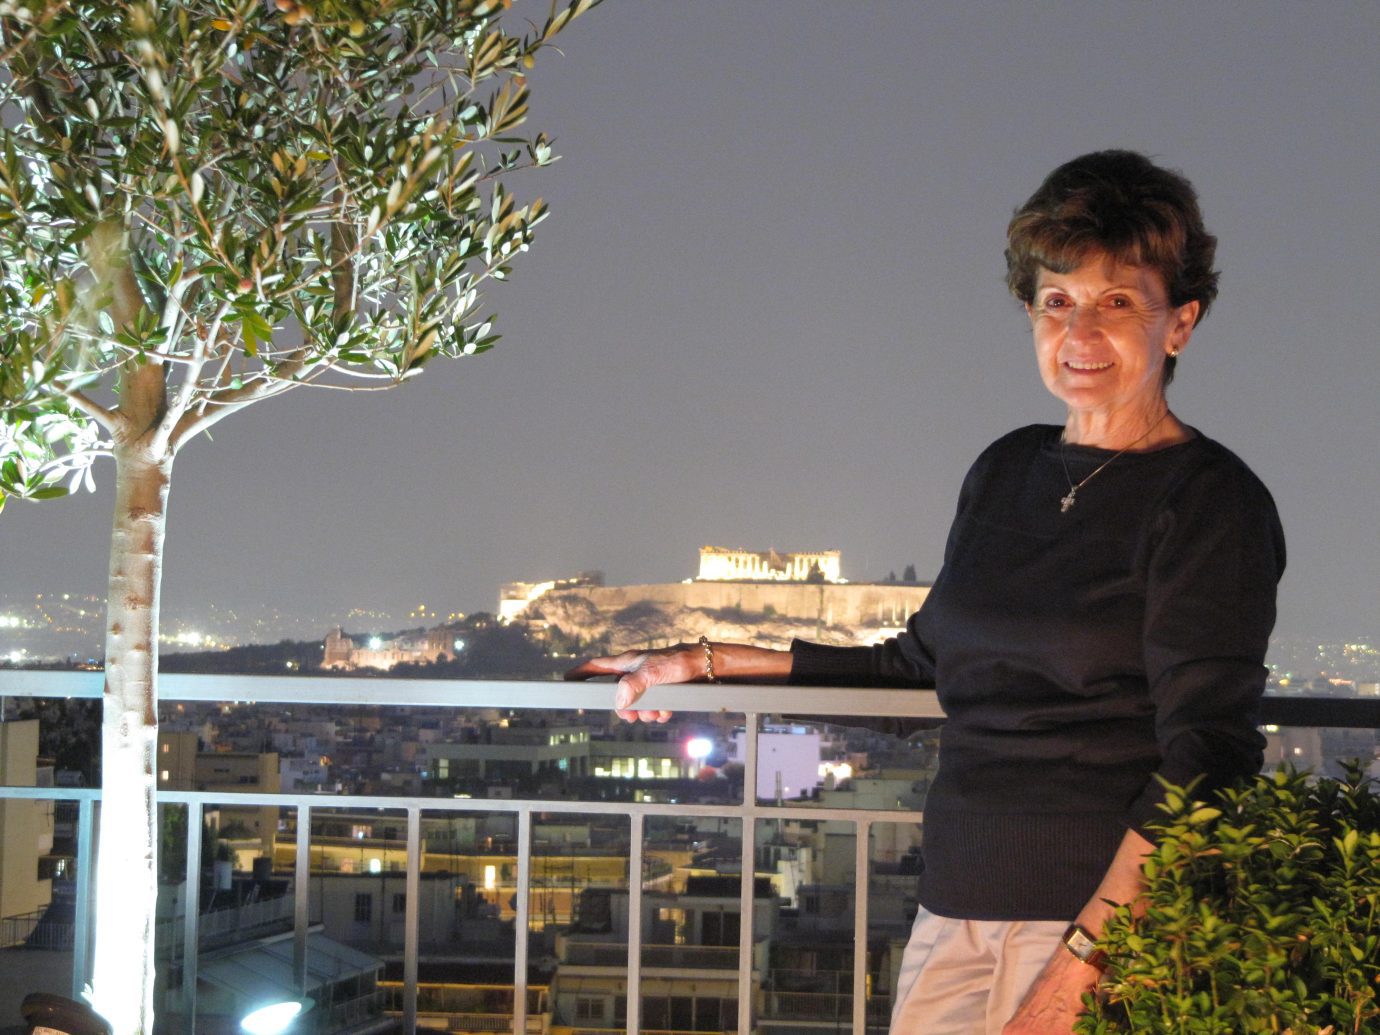 Future Fairway resident Helen Panaretos standing on a lit balcony with an olive tree next to her.